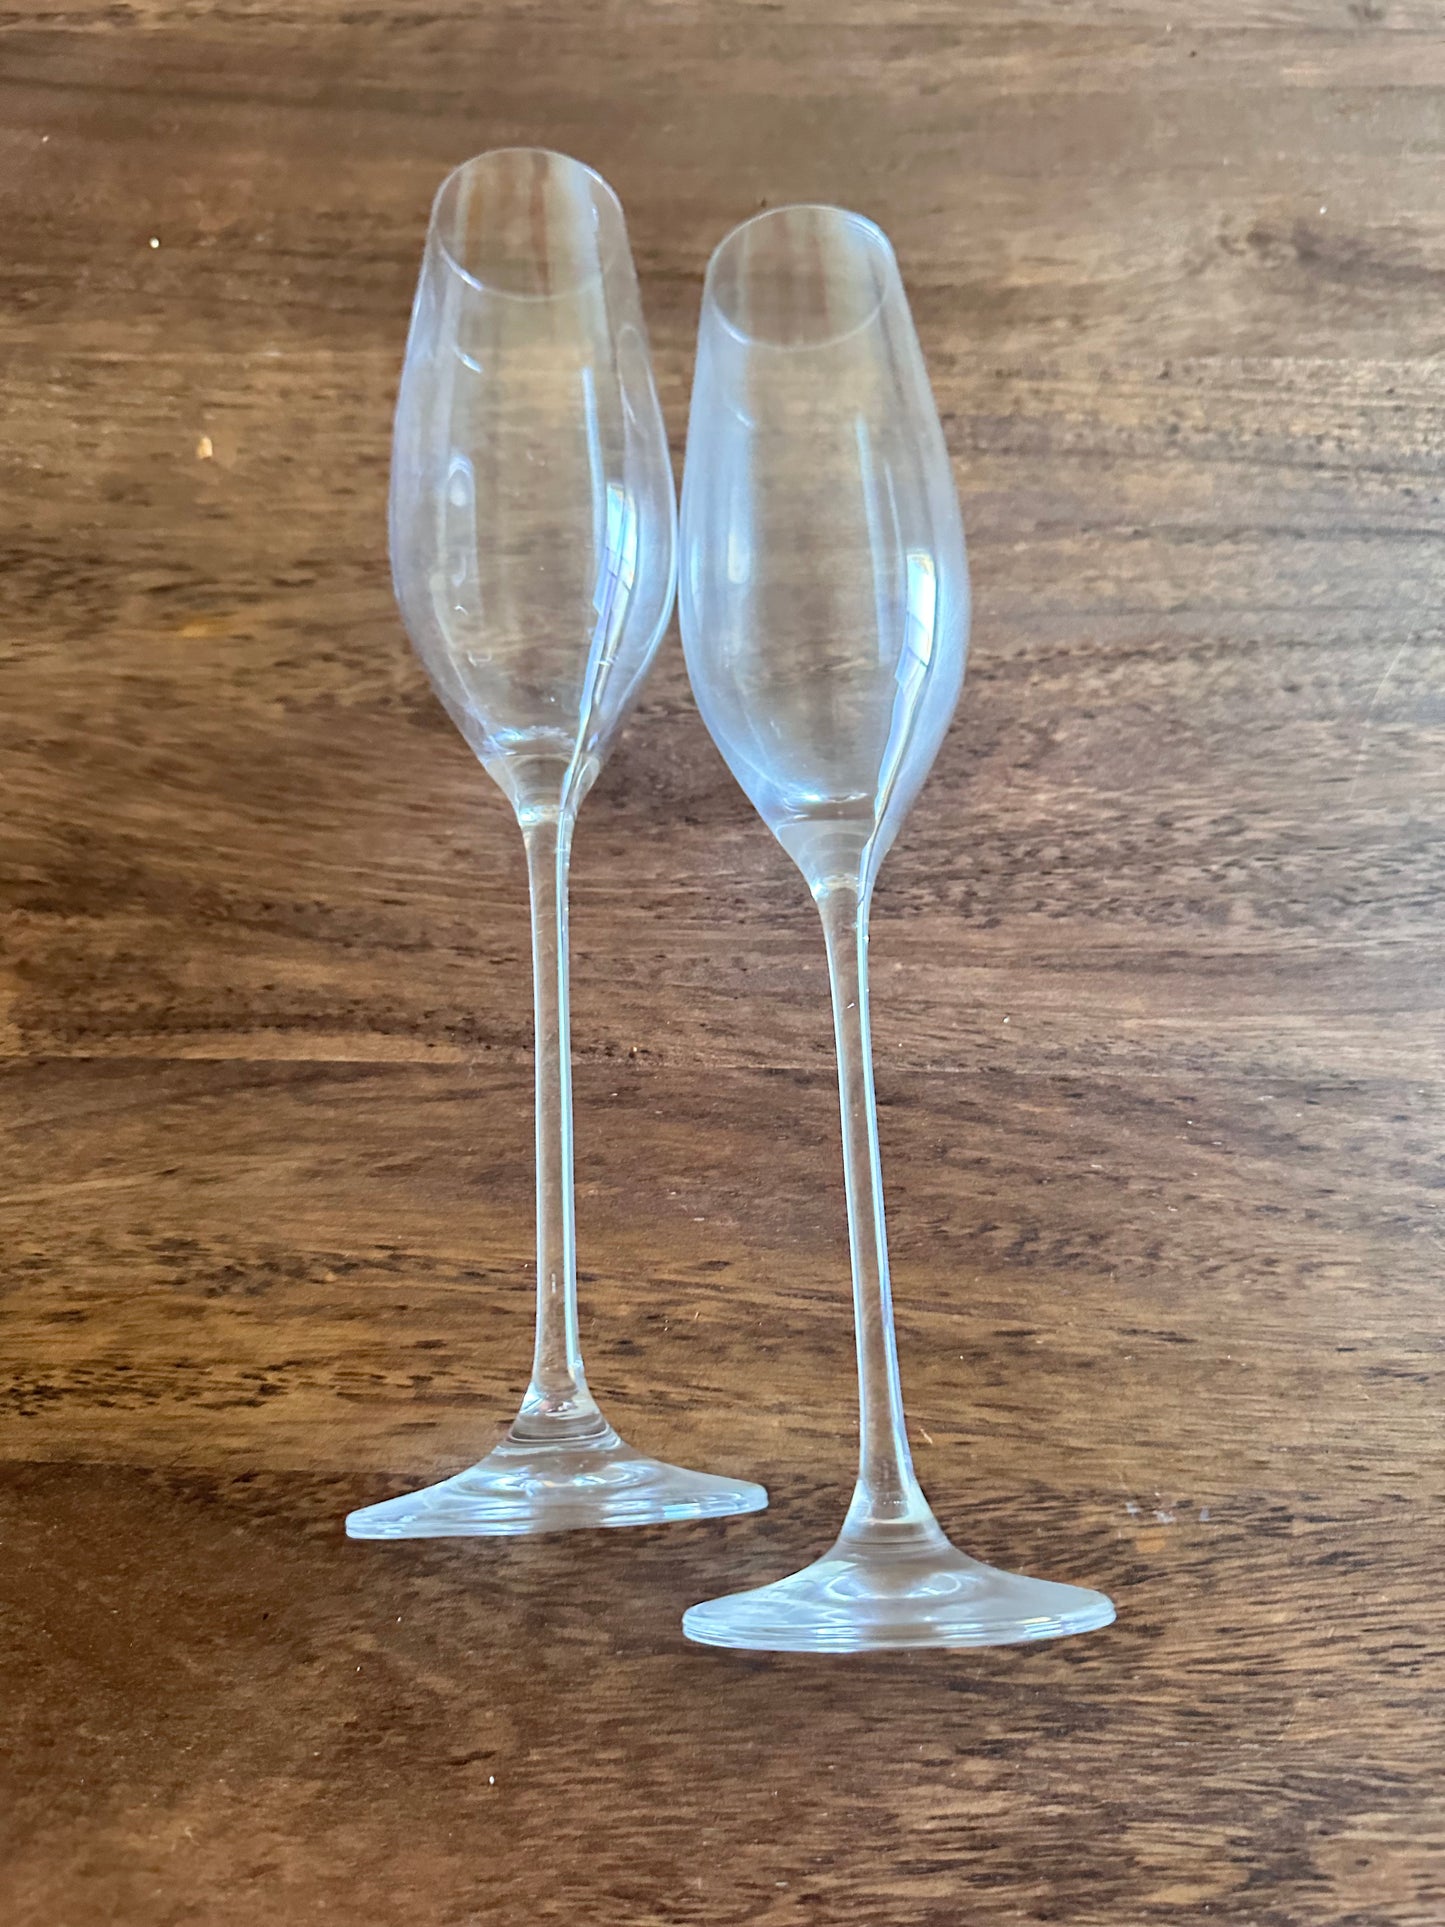 AHS Hotel: The Countess' Champagne Glasses (2)